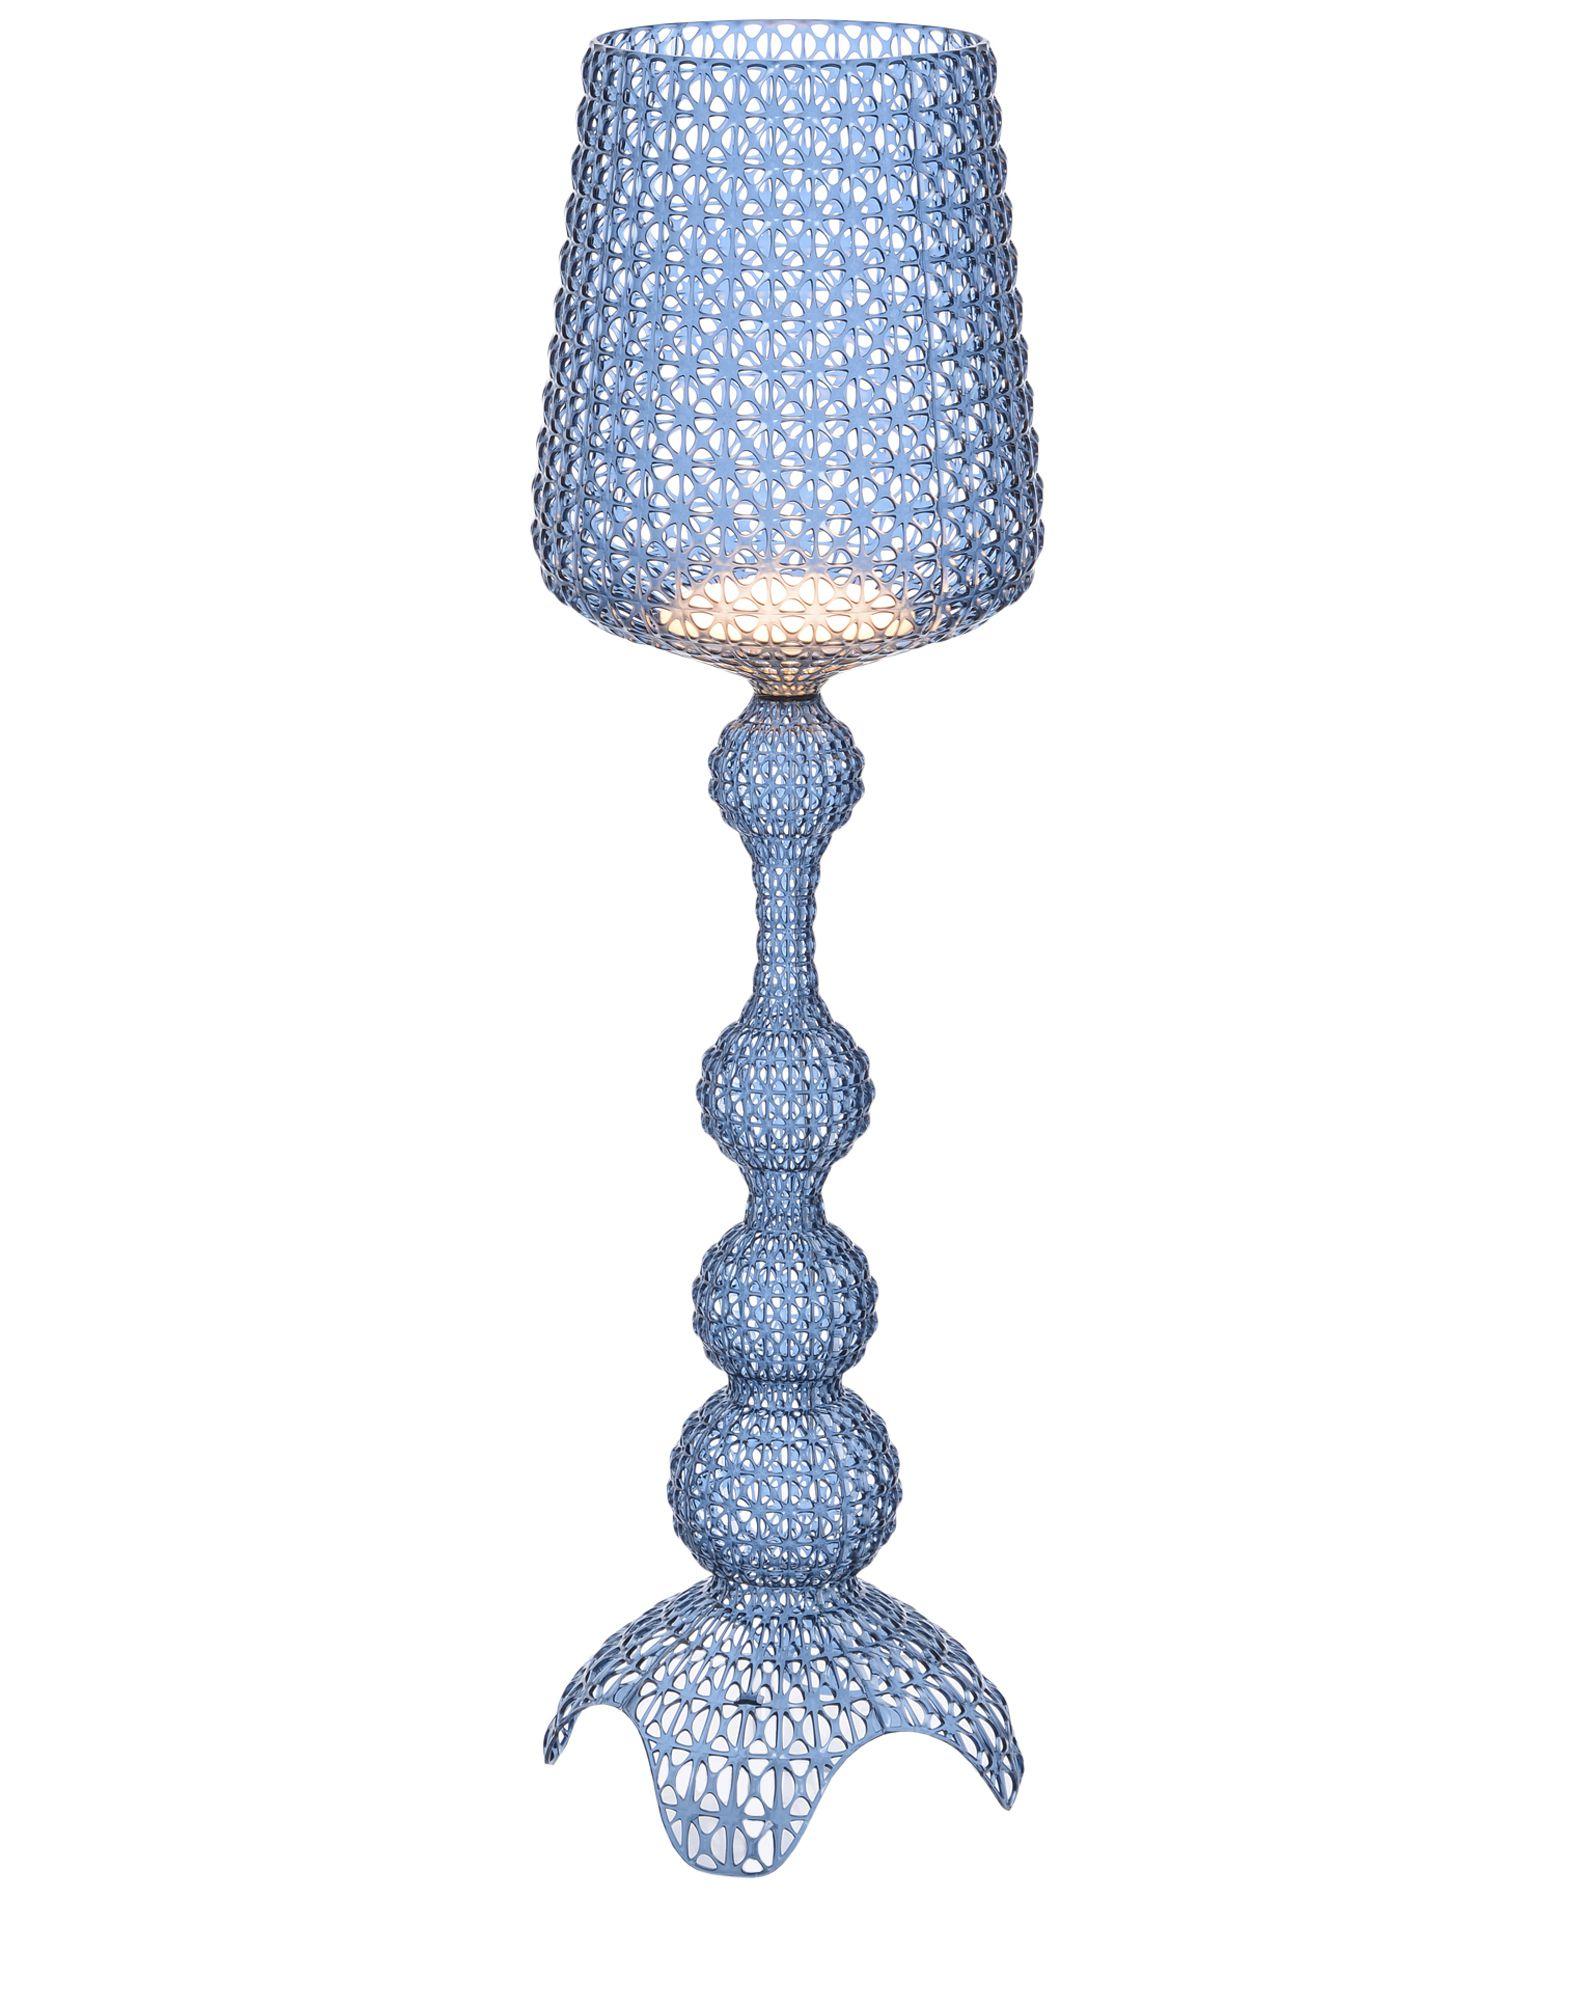 The Kabuki floor lamp is injection molded. The sophisticated injection technology used makes it possible to crate a woven structure similar to lace with a unique perforated surface through which the light is diffused.

Dimensions: Height 65.33